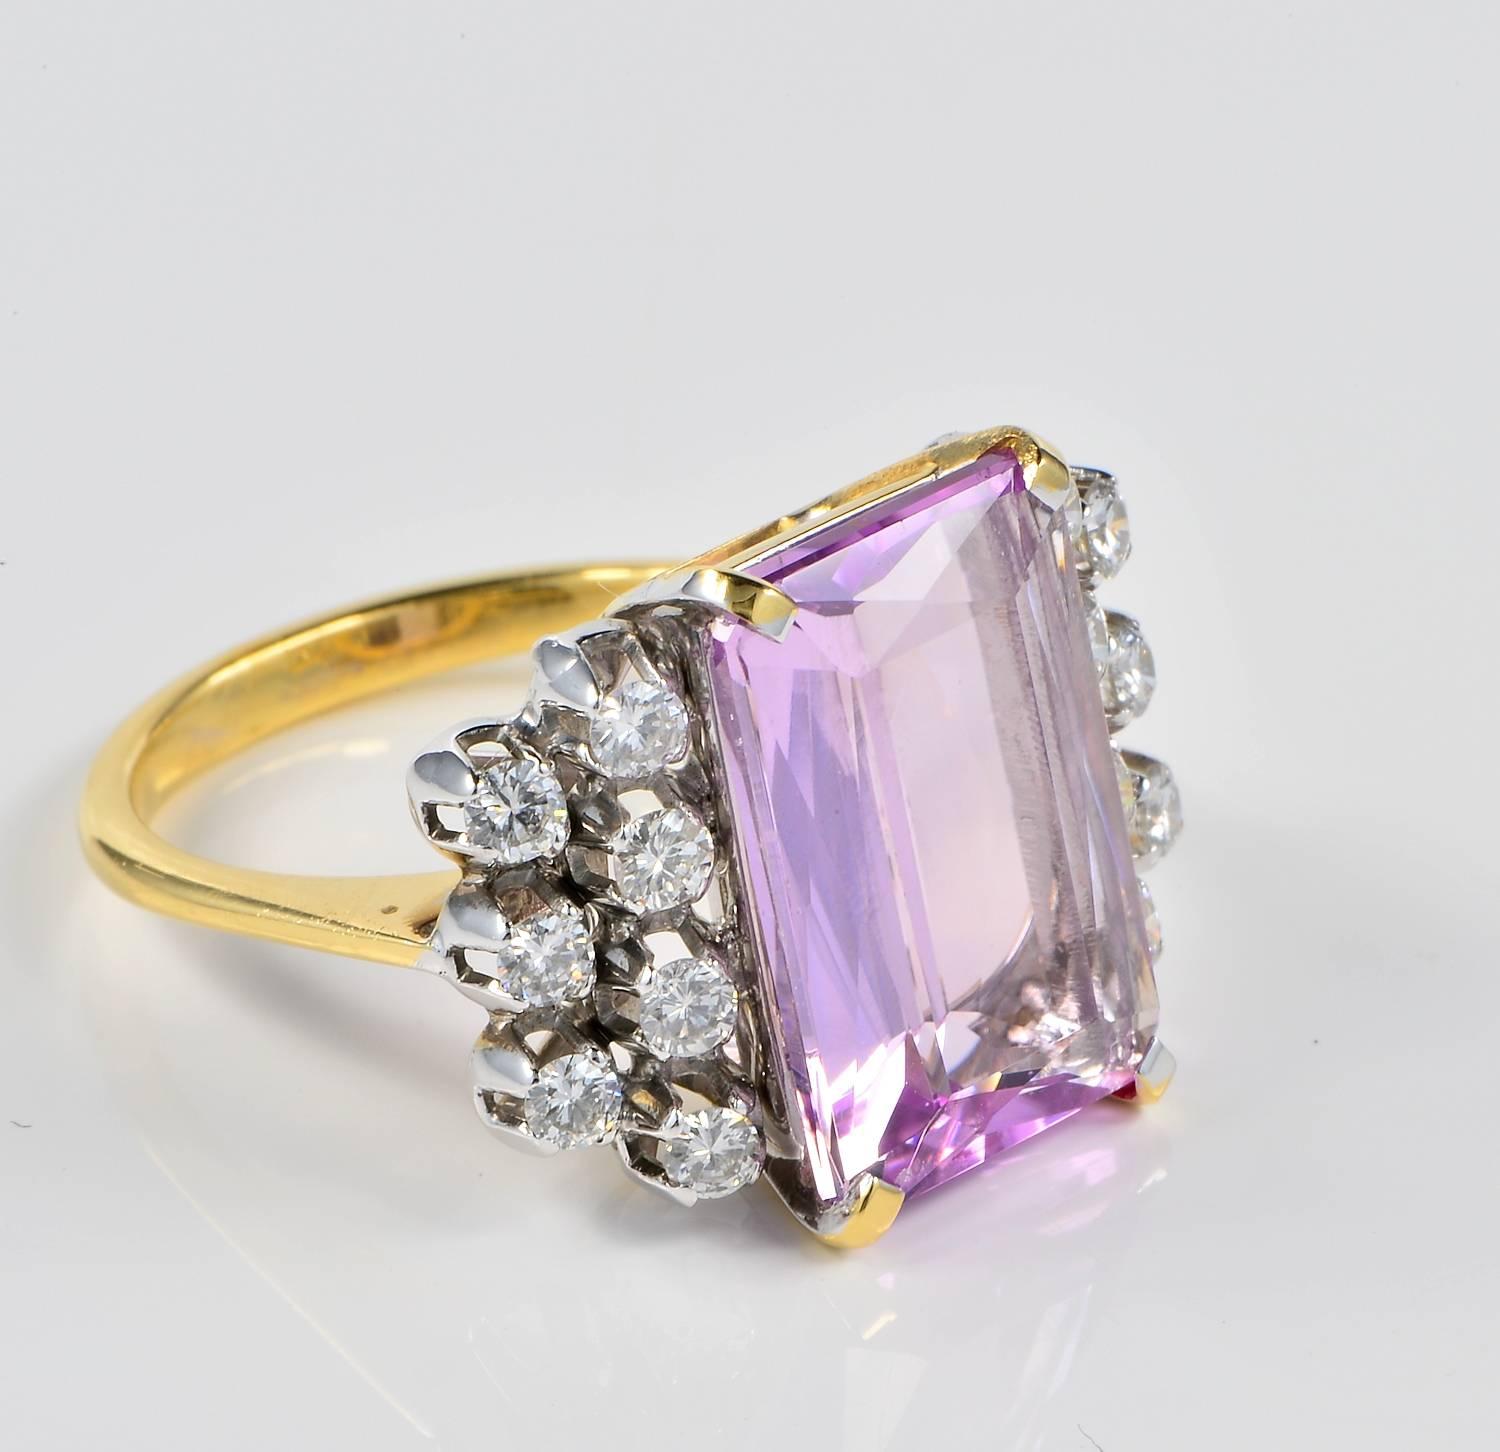 Sensational large sized Natural Kunzite and Diamond vintage ring.
Boasting fine workmanship of solid 18 KT white and yellow gold.
The large Kunzite has a charming pastel pink to it with violet over hue, truly gorgeous colour!
Estimate 8.60 Ct